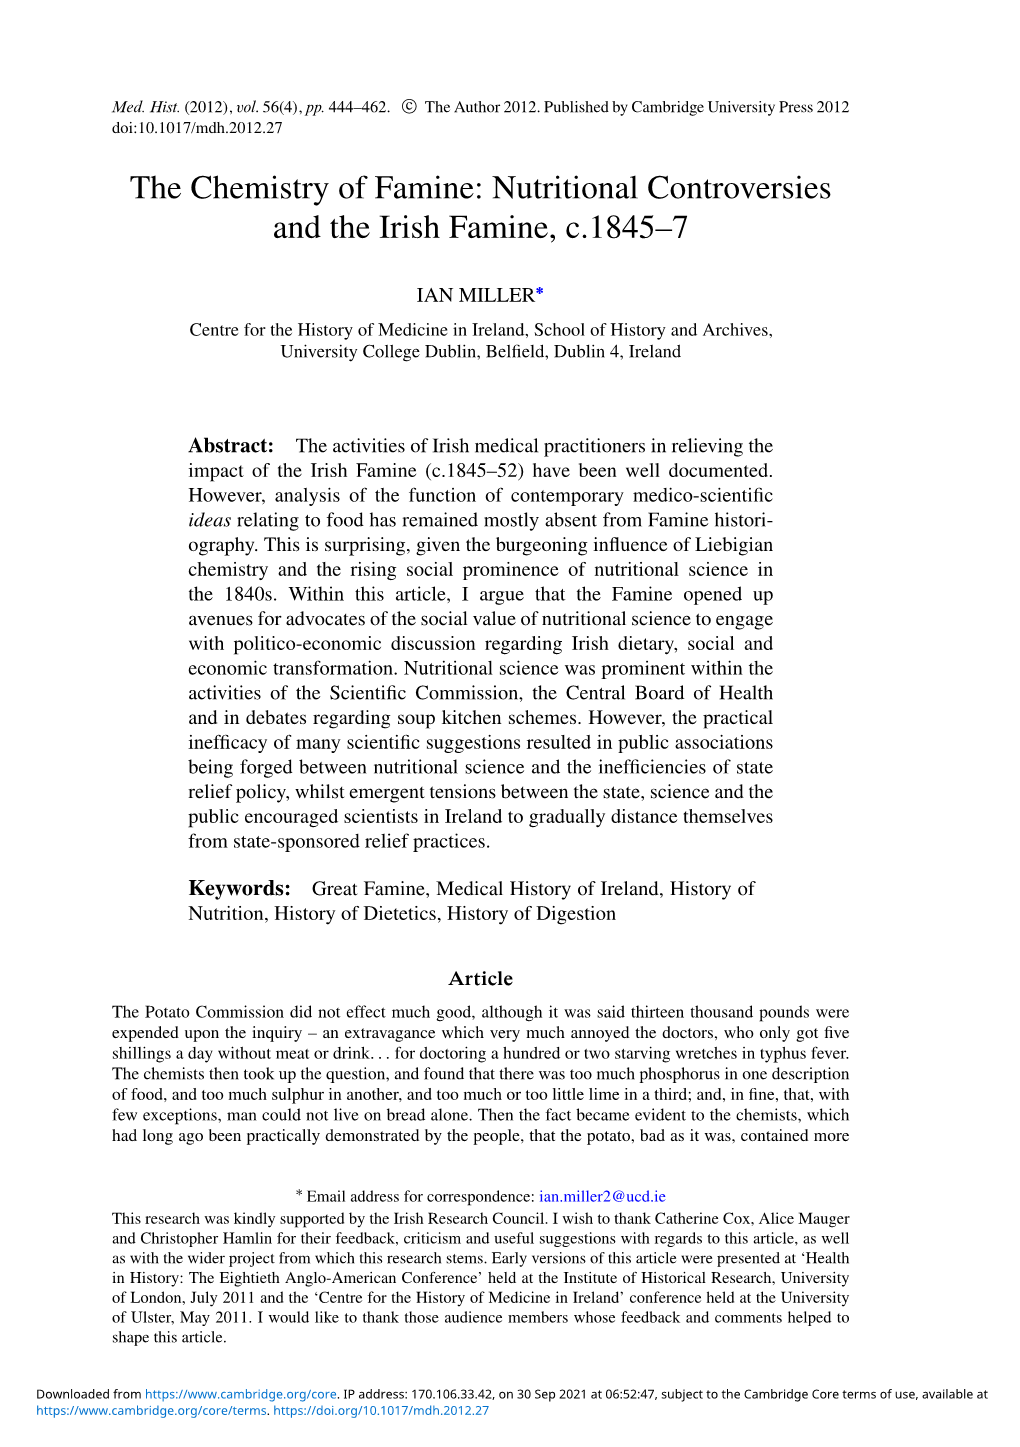 The Chemistry of Famine: Nutritional Controversies and the Irish Famine, C.1845–7